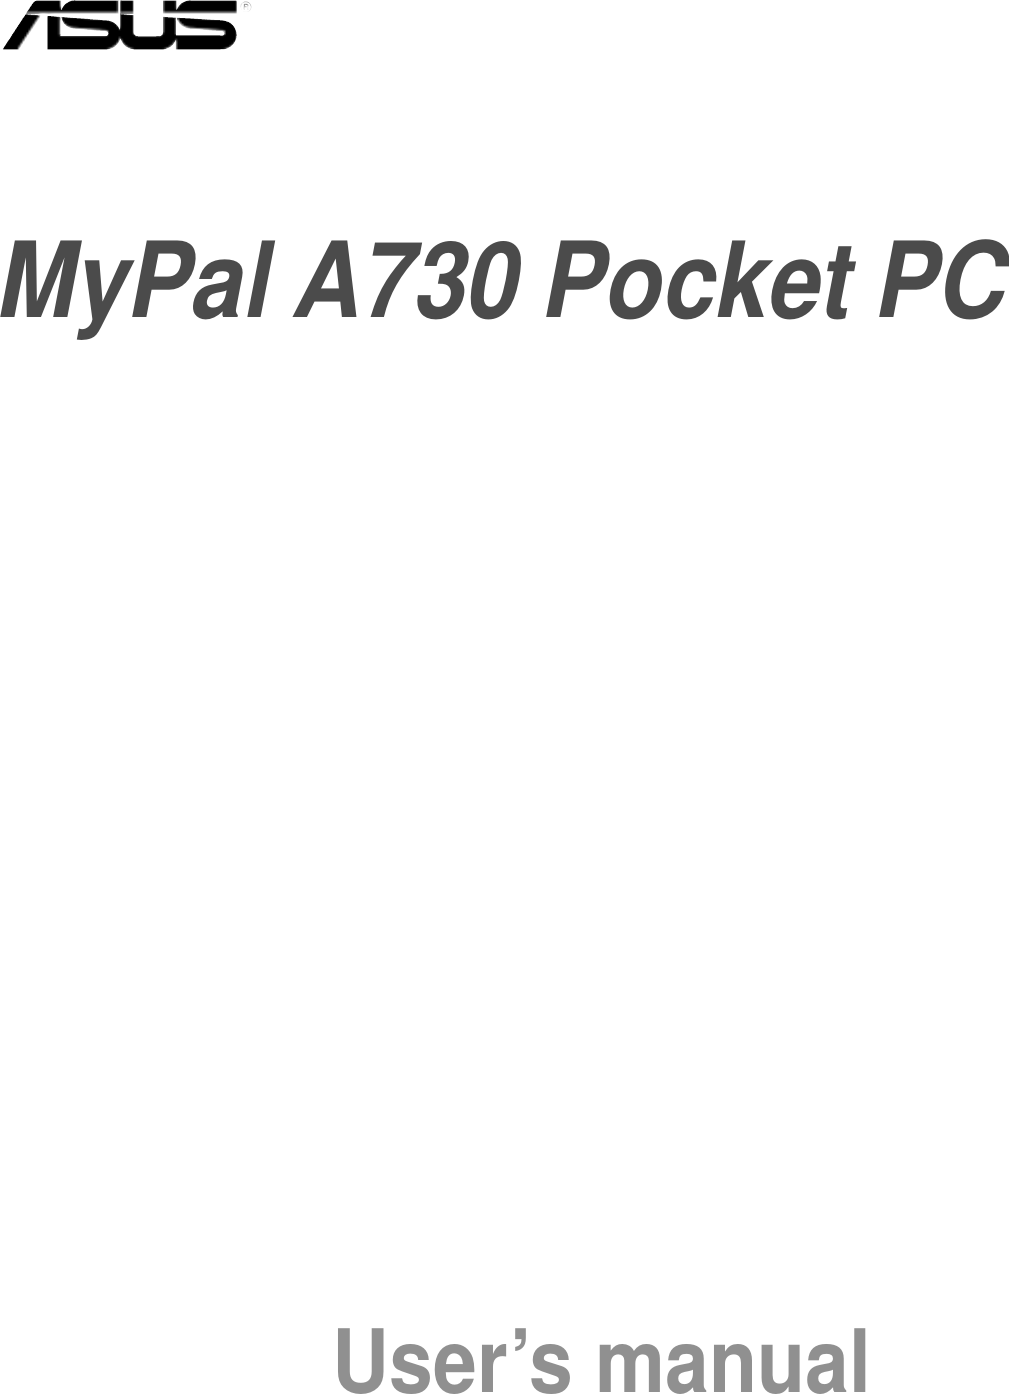 MyPal A730 Pocket PCUser’s manual